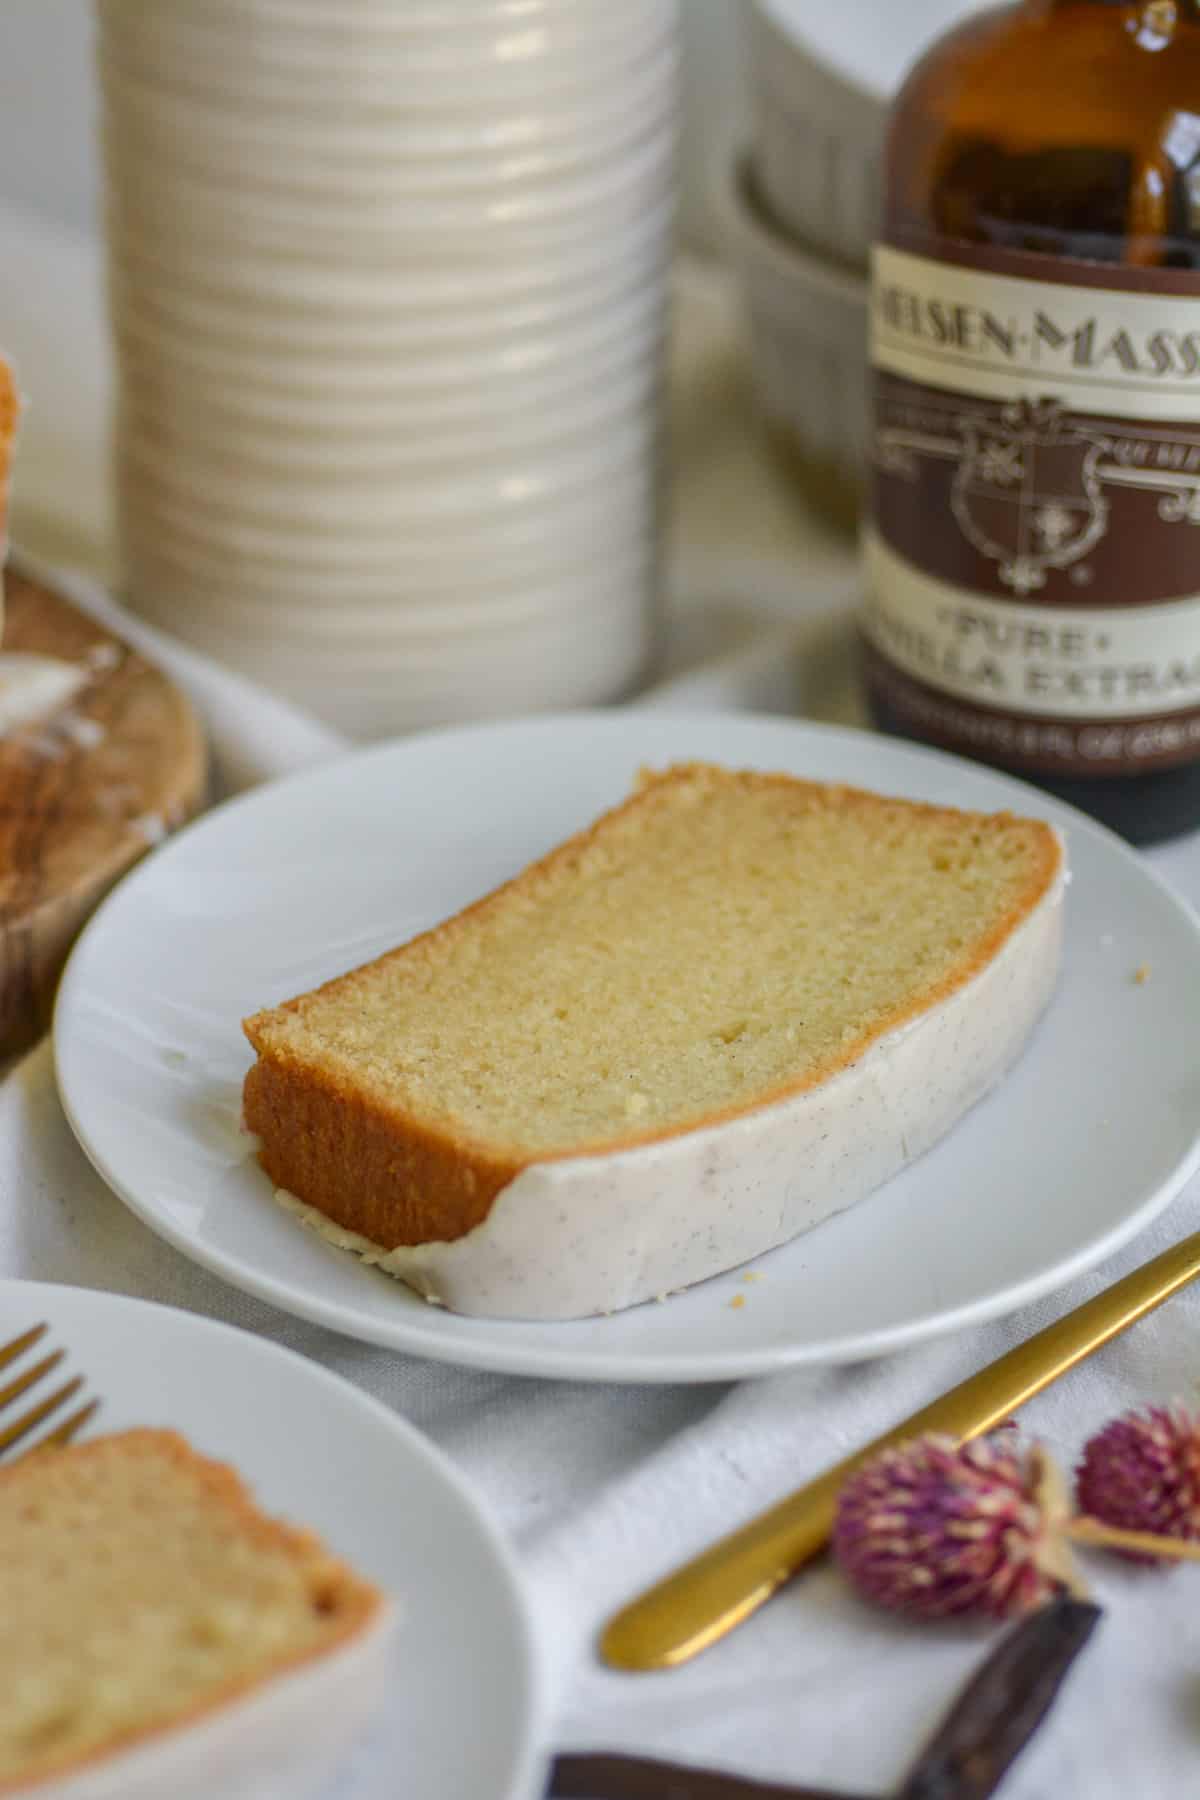 A slice of vegan pound cake on a white plate with a bottle of vanilla extract in the background.